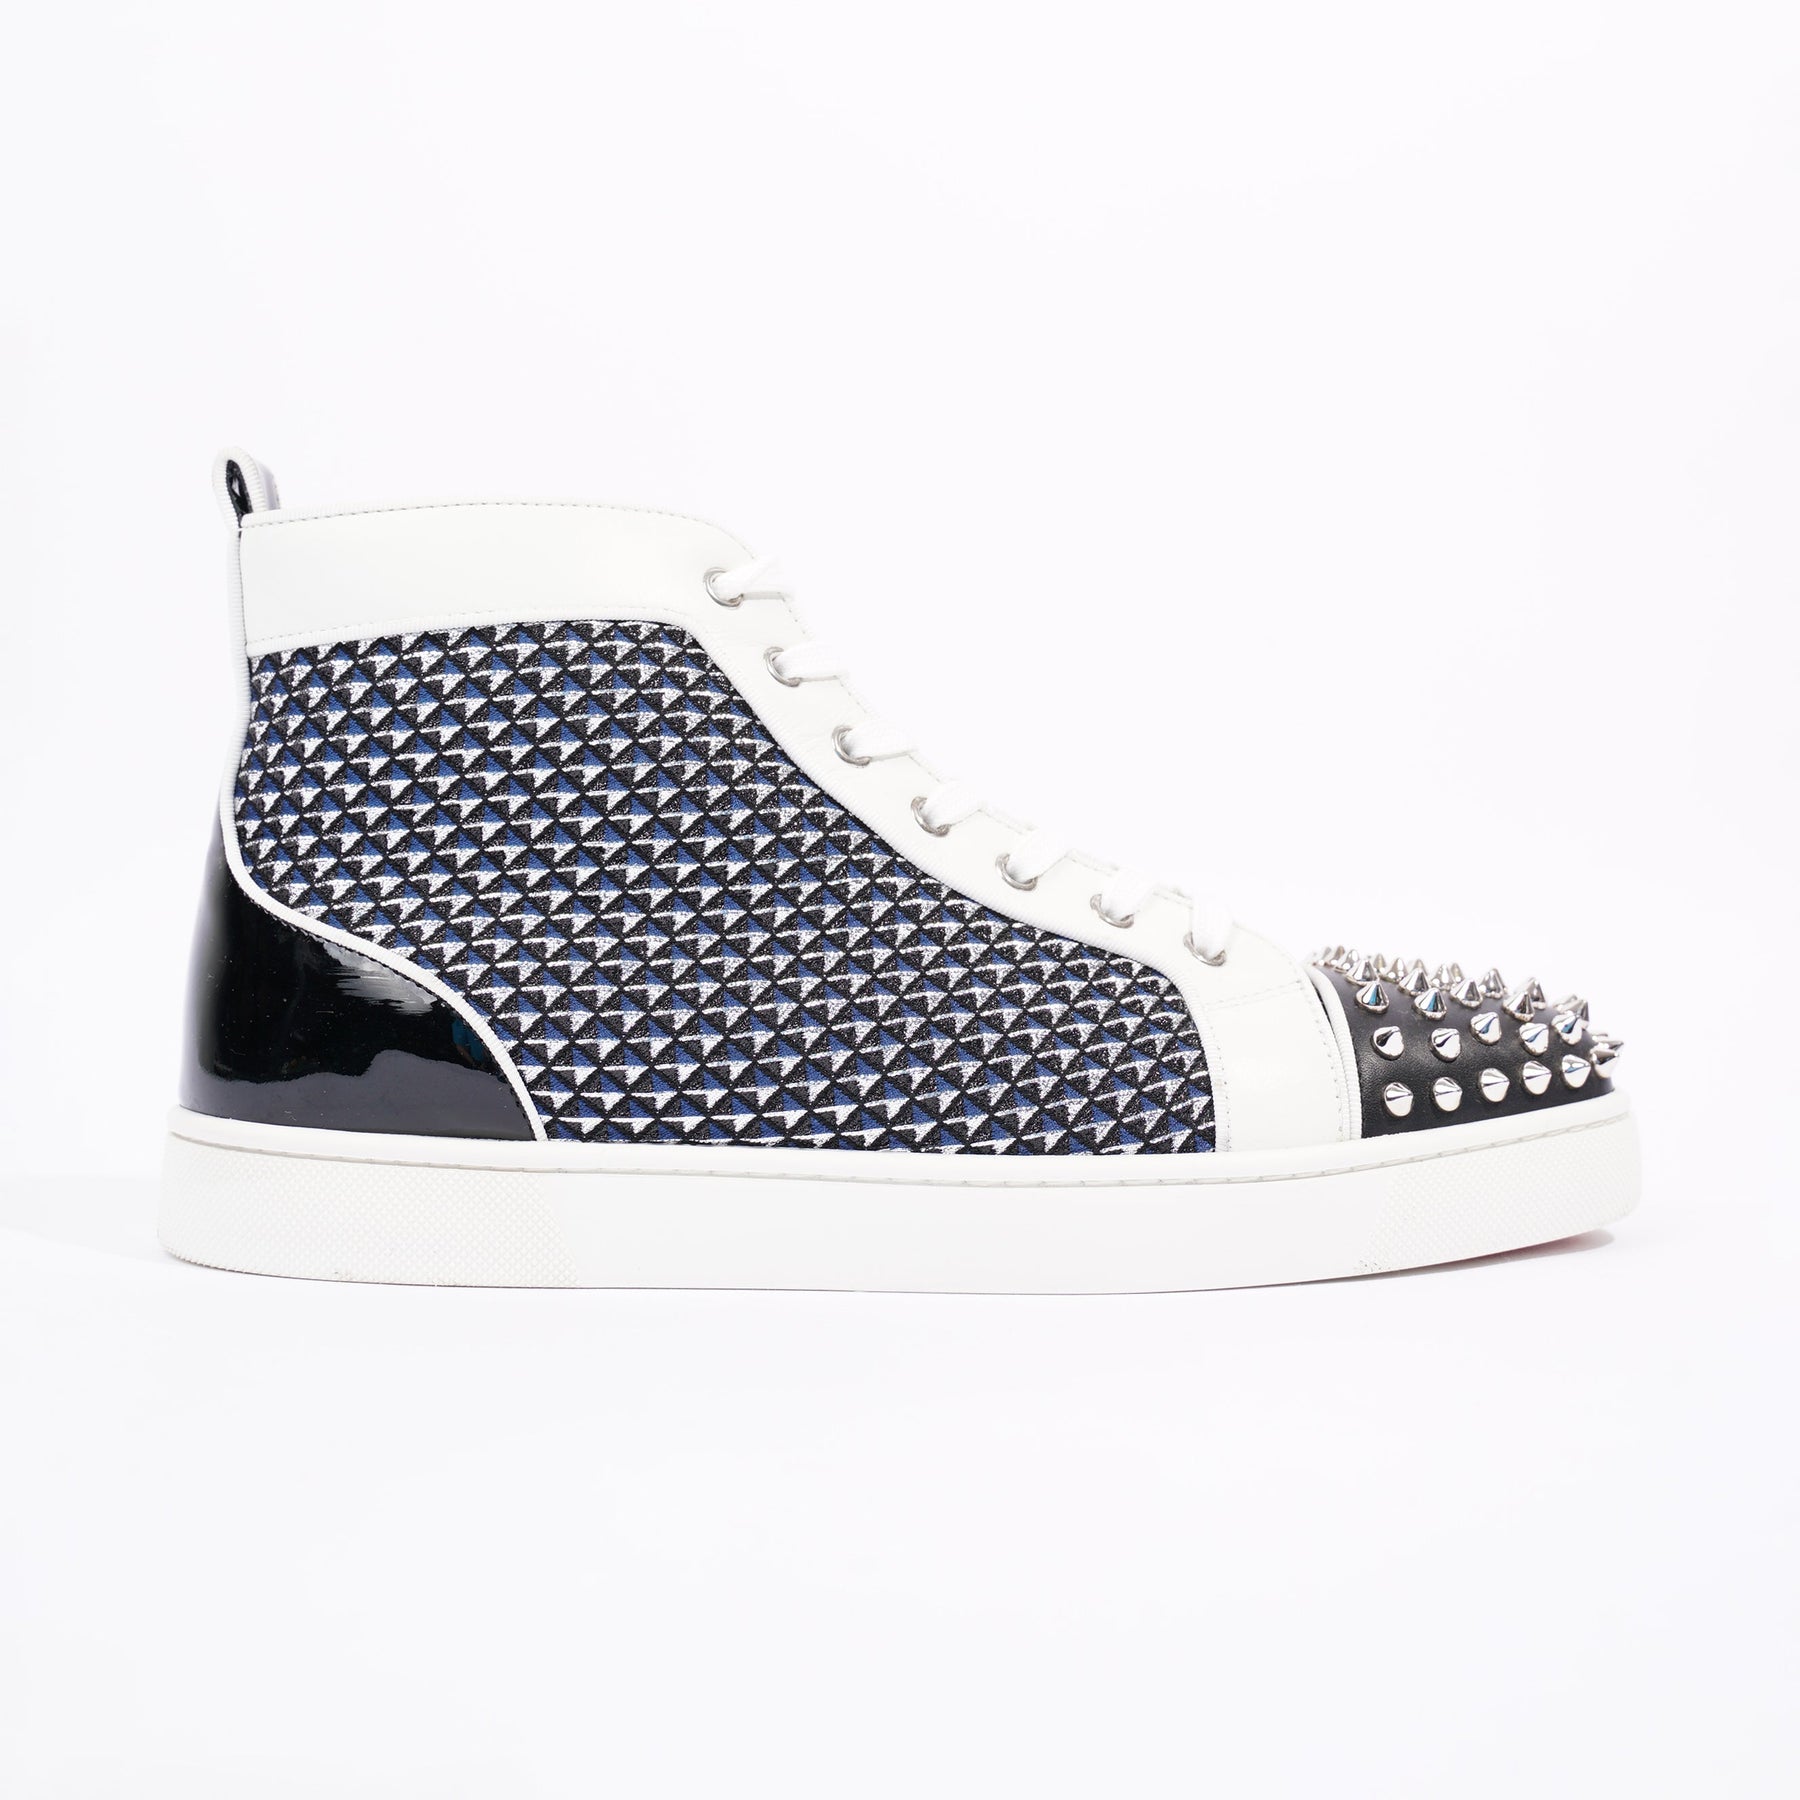 Christian Louboutin Lou Spikes Suede Sneakers - Black - 41.5